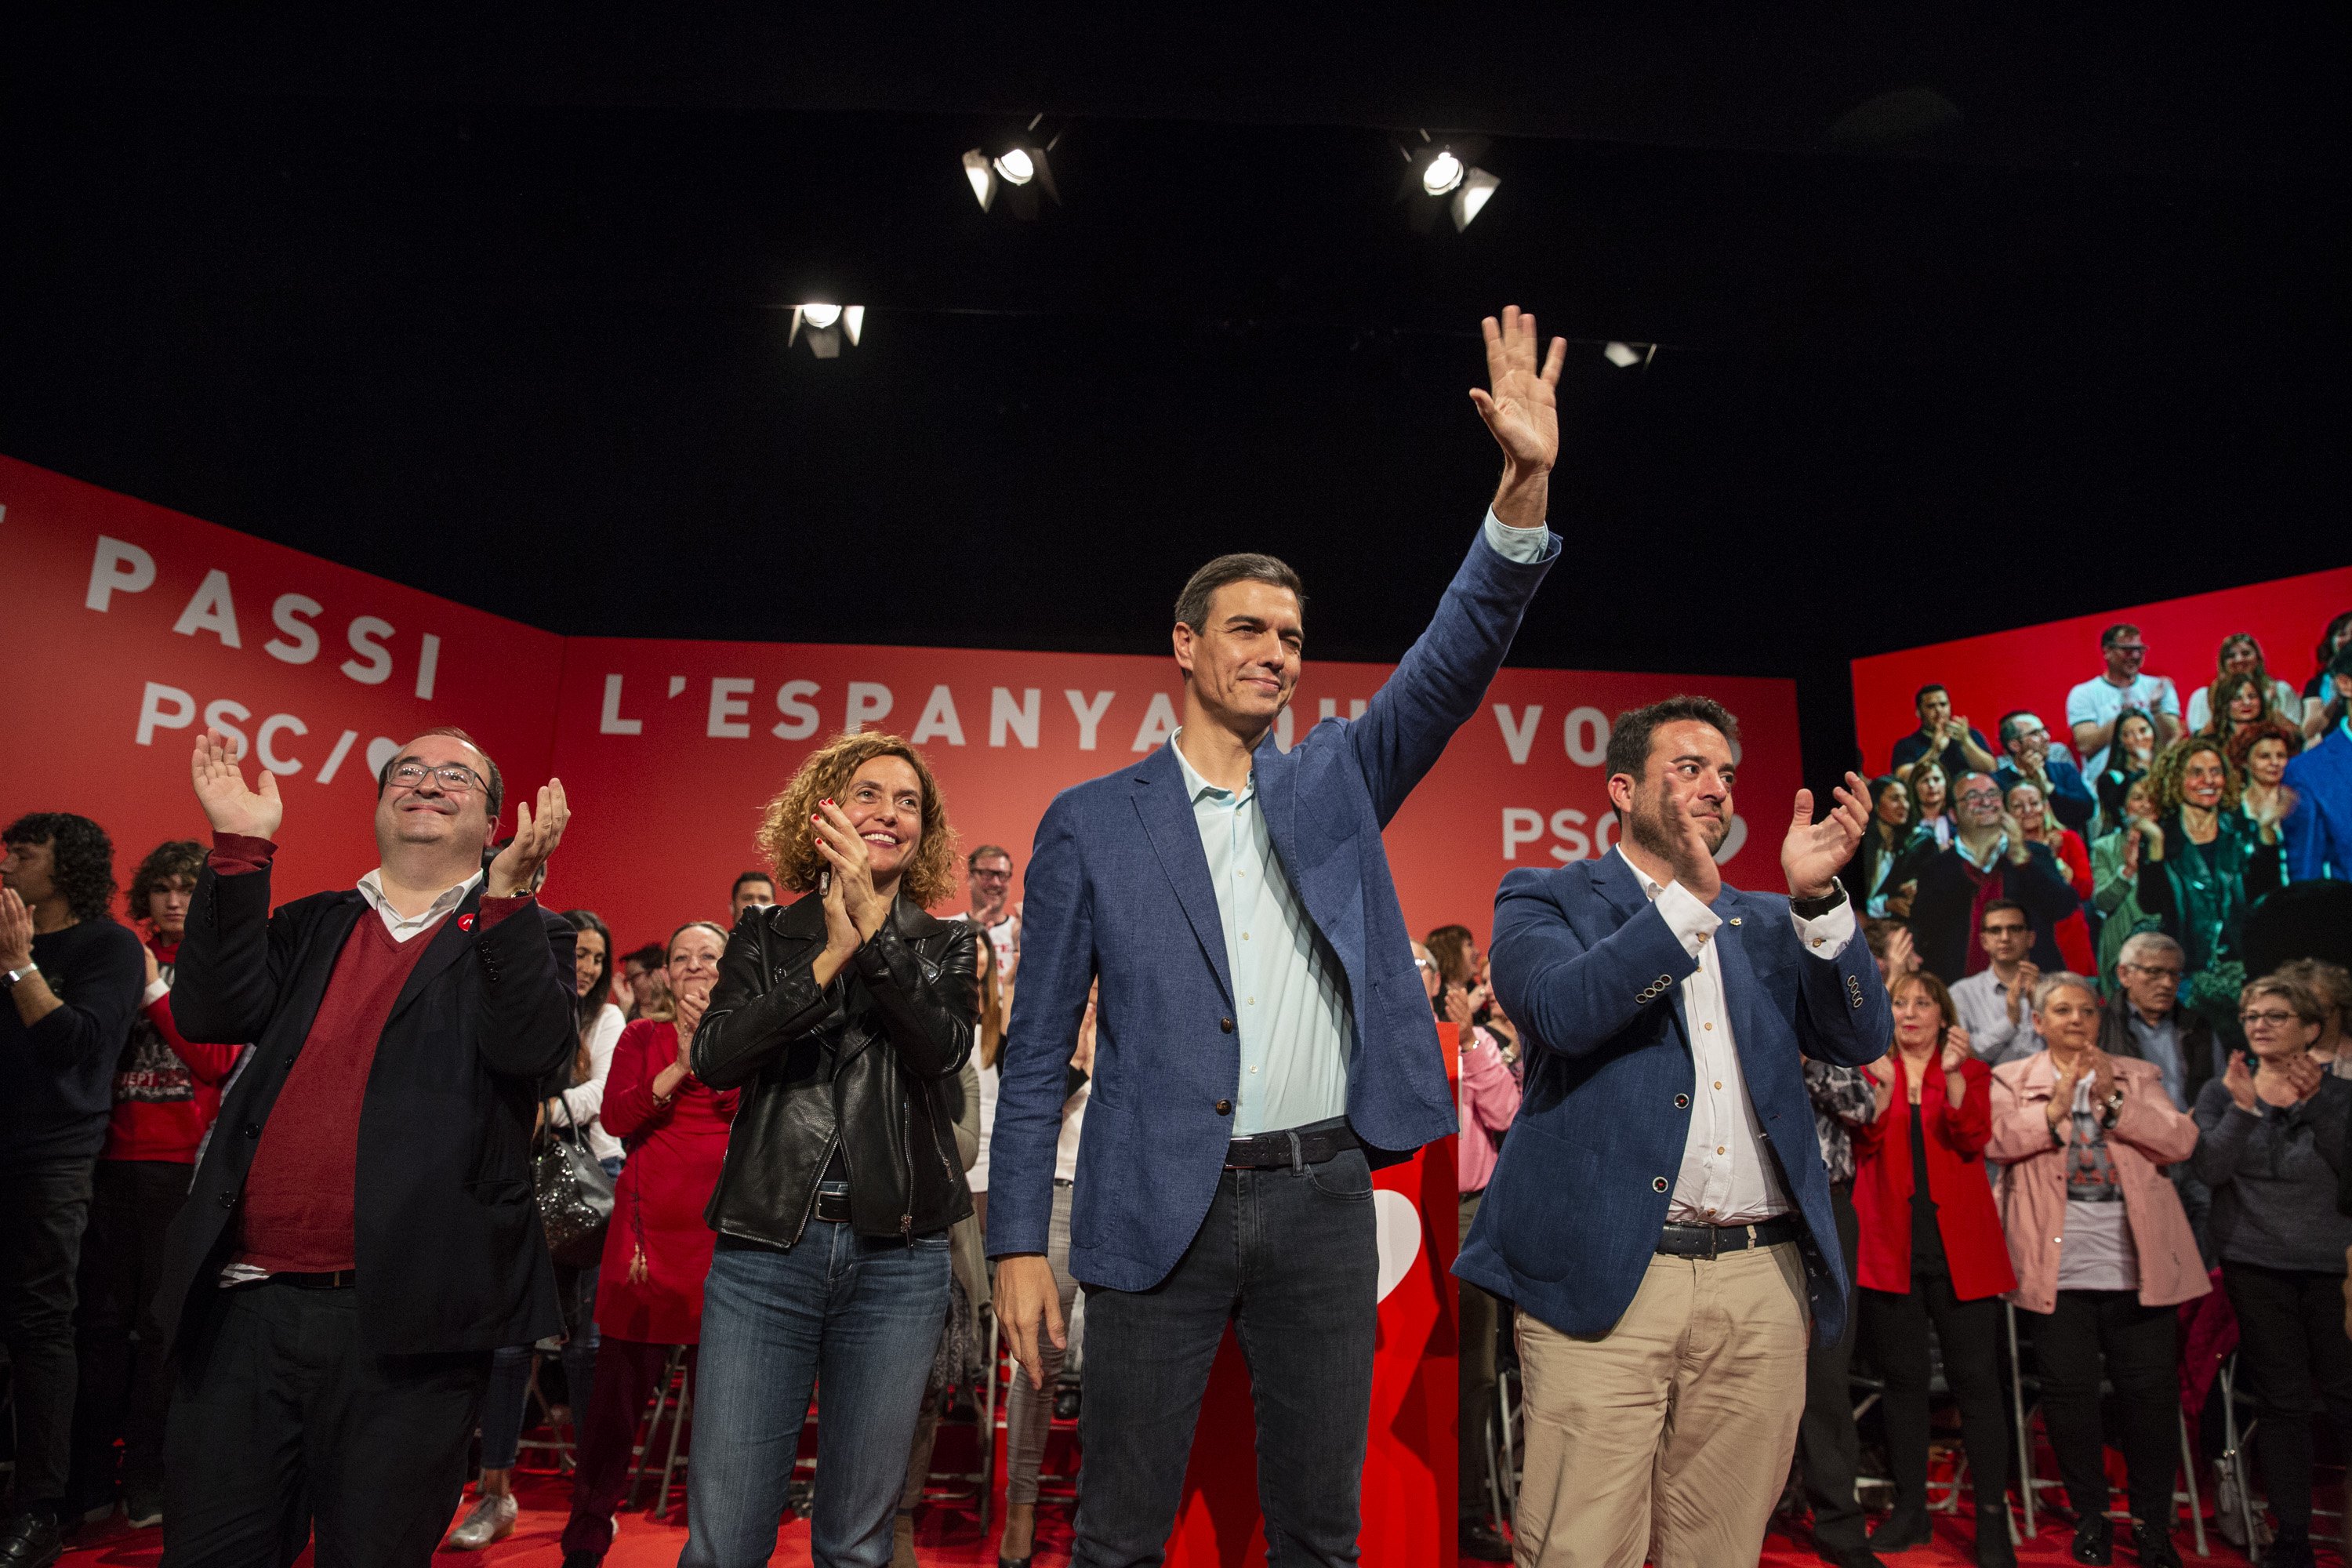 CIS survey finds Socialists reinforced in both Catalonia and Spain